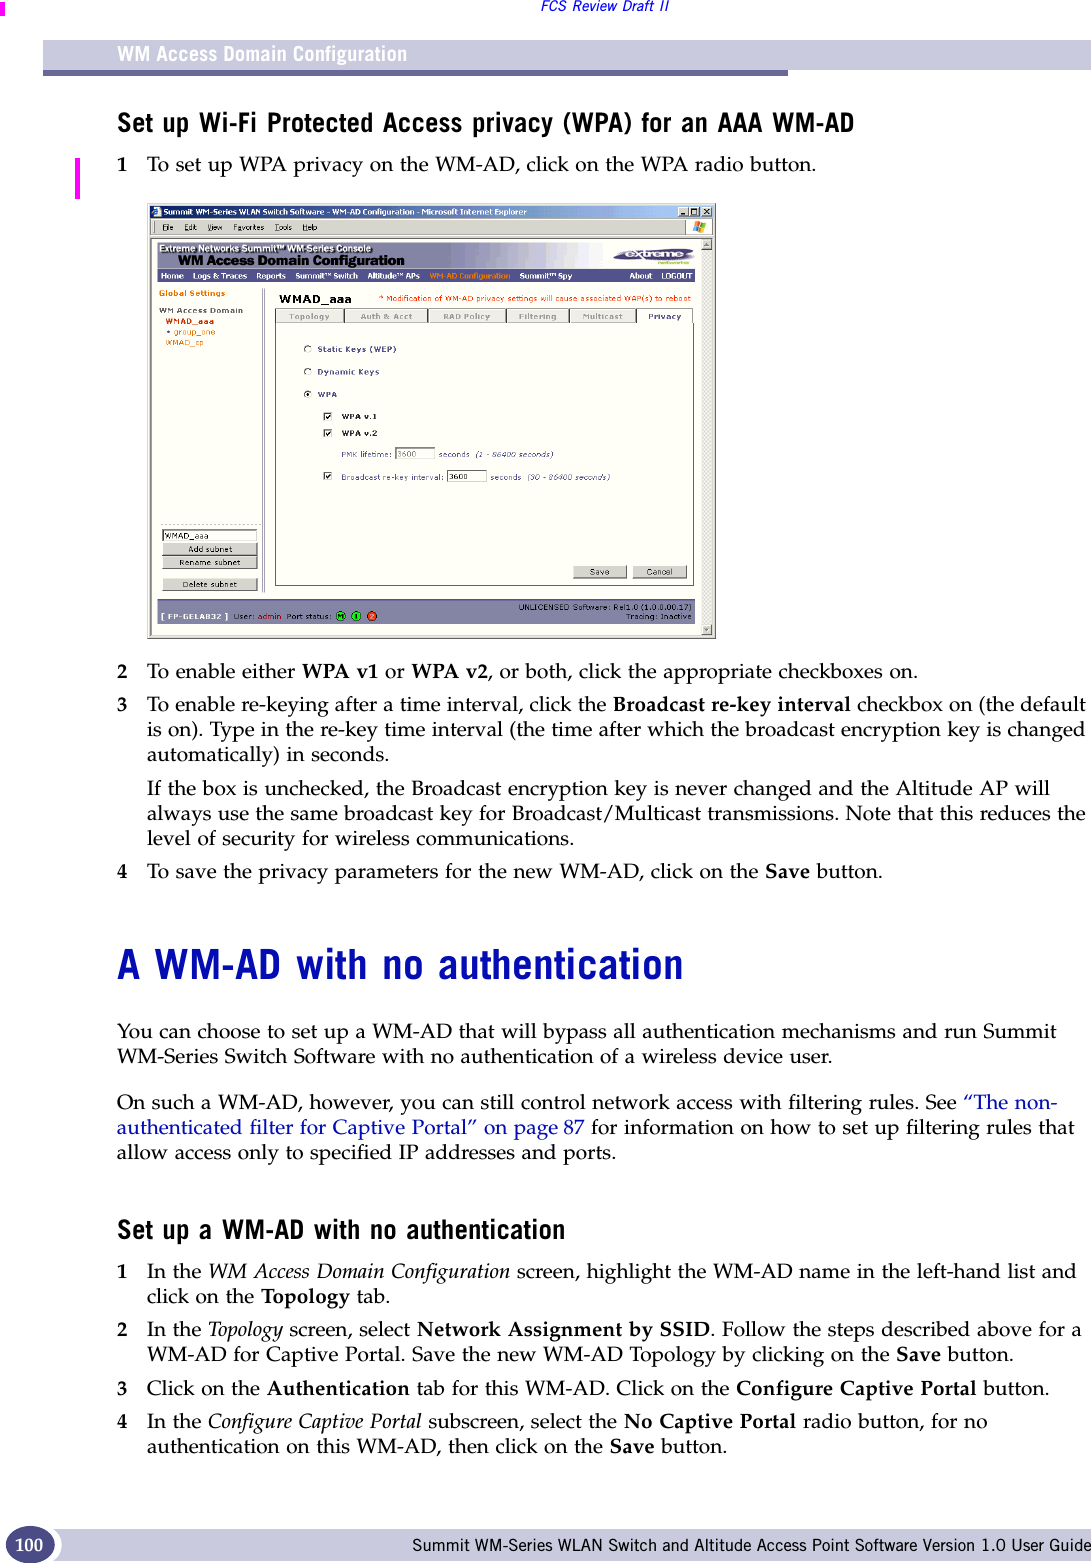 WM Access Domain ConfigurationFCS Review Draft IISummit WM-Series WLAN Switch and Altitude Access Point Software Version 1.0 User Guide100Set up Wi-Fi Protected Access privacy (WPA) for an AAA WM-AD1To set up WPA privacy on the WM-AD, click on the WPA radio button.2To enable either WPA v1 or WPA v2, or both, click the appropriate checkboxes on.3To enable re-keying after a time interval, click the Broadcast re-key interval checkbox on (the default is on). Type in the re-key time interval (the time after which the broadcast encryption key is changed automatically) in seconds.If the box is unchecked, the Broadcast encryption key is never changed and the Altitude AP will always use the same broadcast key for Broadcast/Multicast transmissions. Note that this reduces the level of security for wireless communications.4To save the privacy parameters for the new WM-AD, click on the Save button.A WM-AD with no authenticationYou can choose to set up a WM-AD that will bypass all authentication mechanisms and run Summit WM-Series Switch Software with no authentication of a wireless device user. On such a WM-AD, however, you can still control network access with filtering rules. See “The non-authenticated filter for Captive Portal” on page 87 for information on how to set up filtering rules that allow access only to specified IP addresses and ports.Set up a WM-AD with no authentication1In the WM Access Domain Configuration screen, highlight the WM-AD name in the left-hand list and click on the Topo logy tab.2In the Top olog y screen, select Network Assignment by SSID. Follow the steps described above for a WM-AD for Captive Portal. Save the new WM-AD Topology by clicking on the Save button. 3Click on the Authentication tab for this WM-AD. Click on the Configure Captive Portal button. 4In the Configure Captive Portal subscreen, select the No Captive Portal radio button, for no authentication on this WM-AD, then click on the Save button.